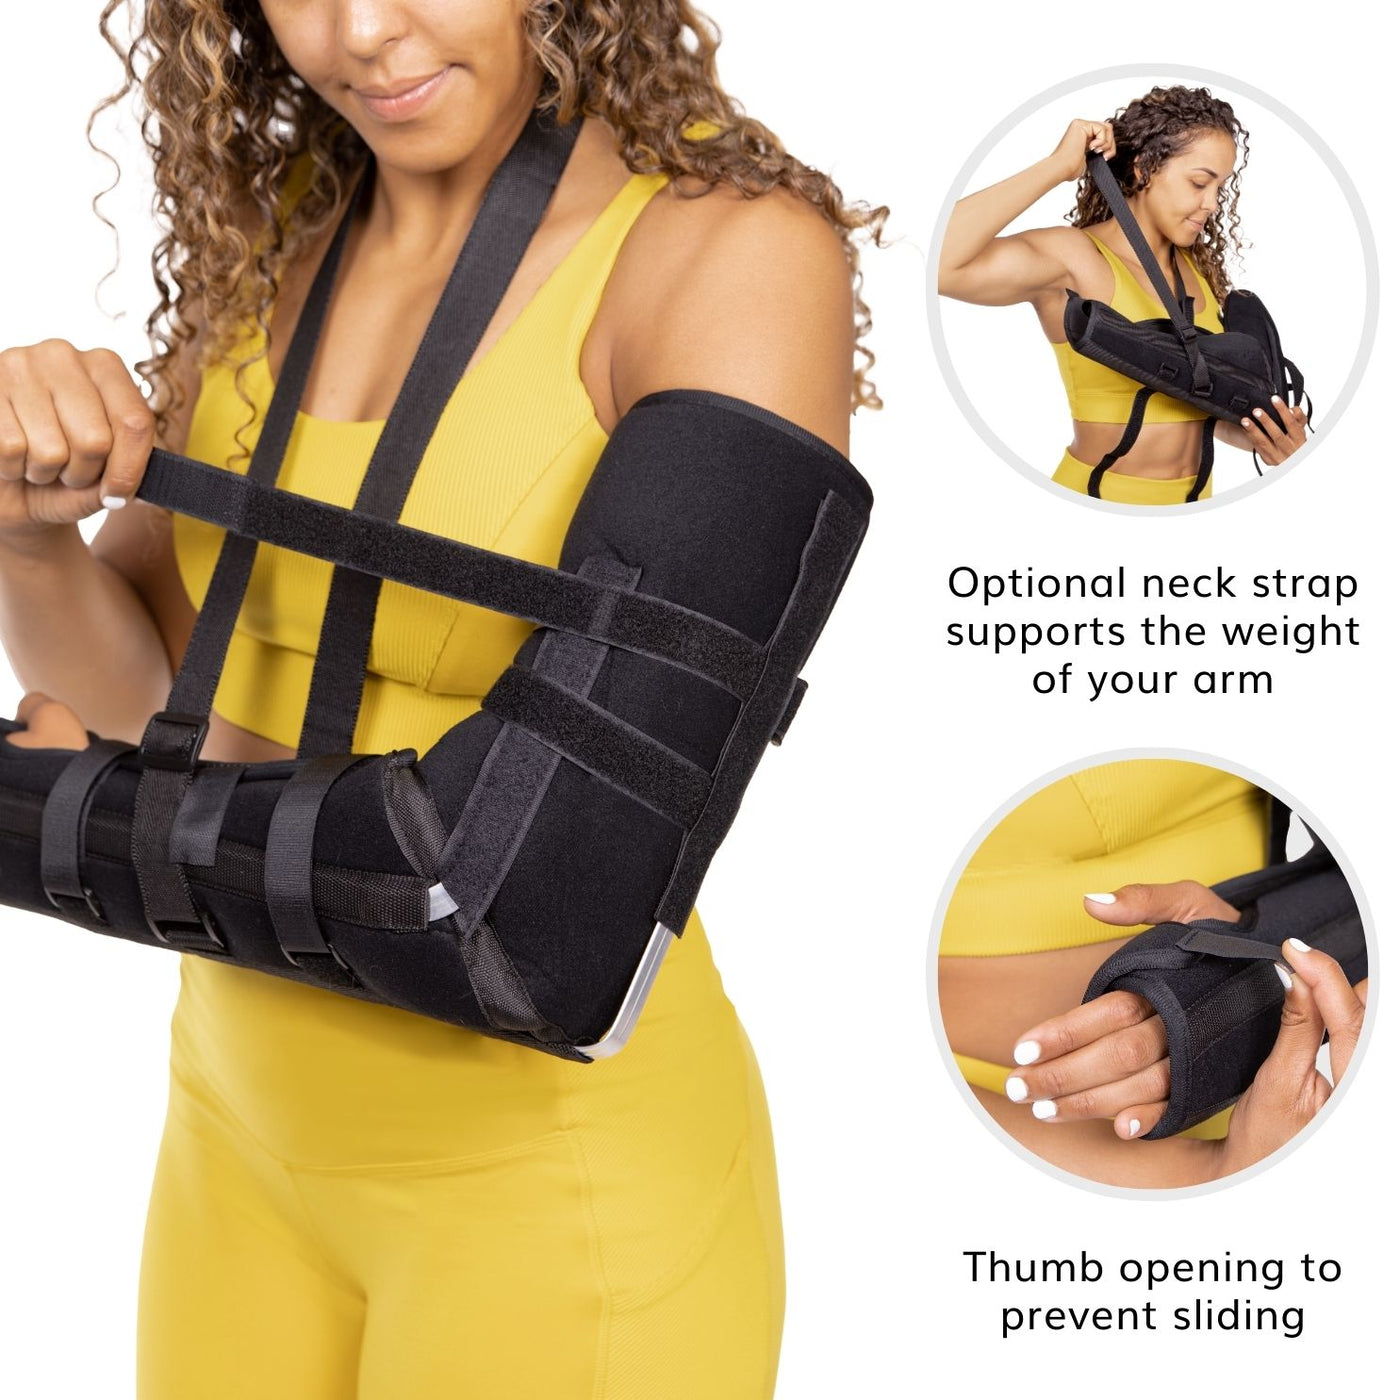 The arm and elbow splint for fracture pain relief has a removable neck strap to support the weight of injured arm